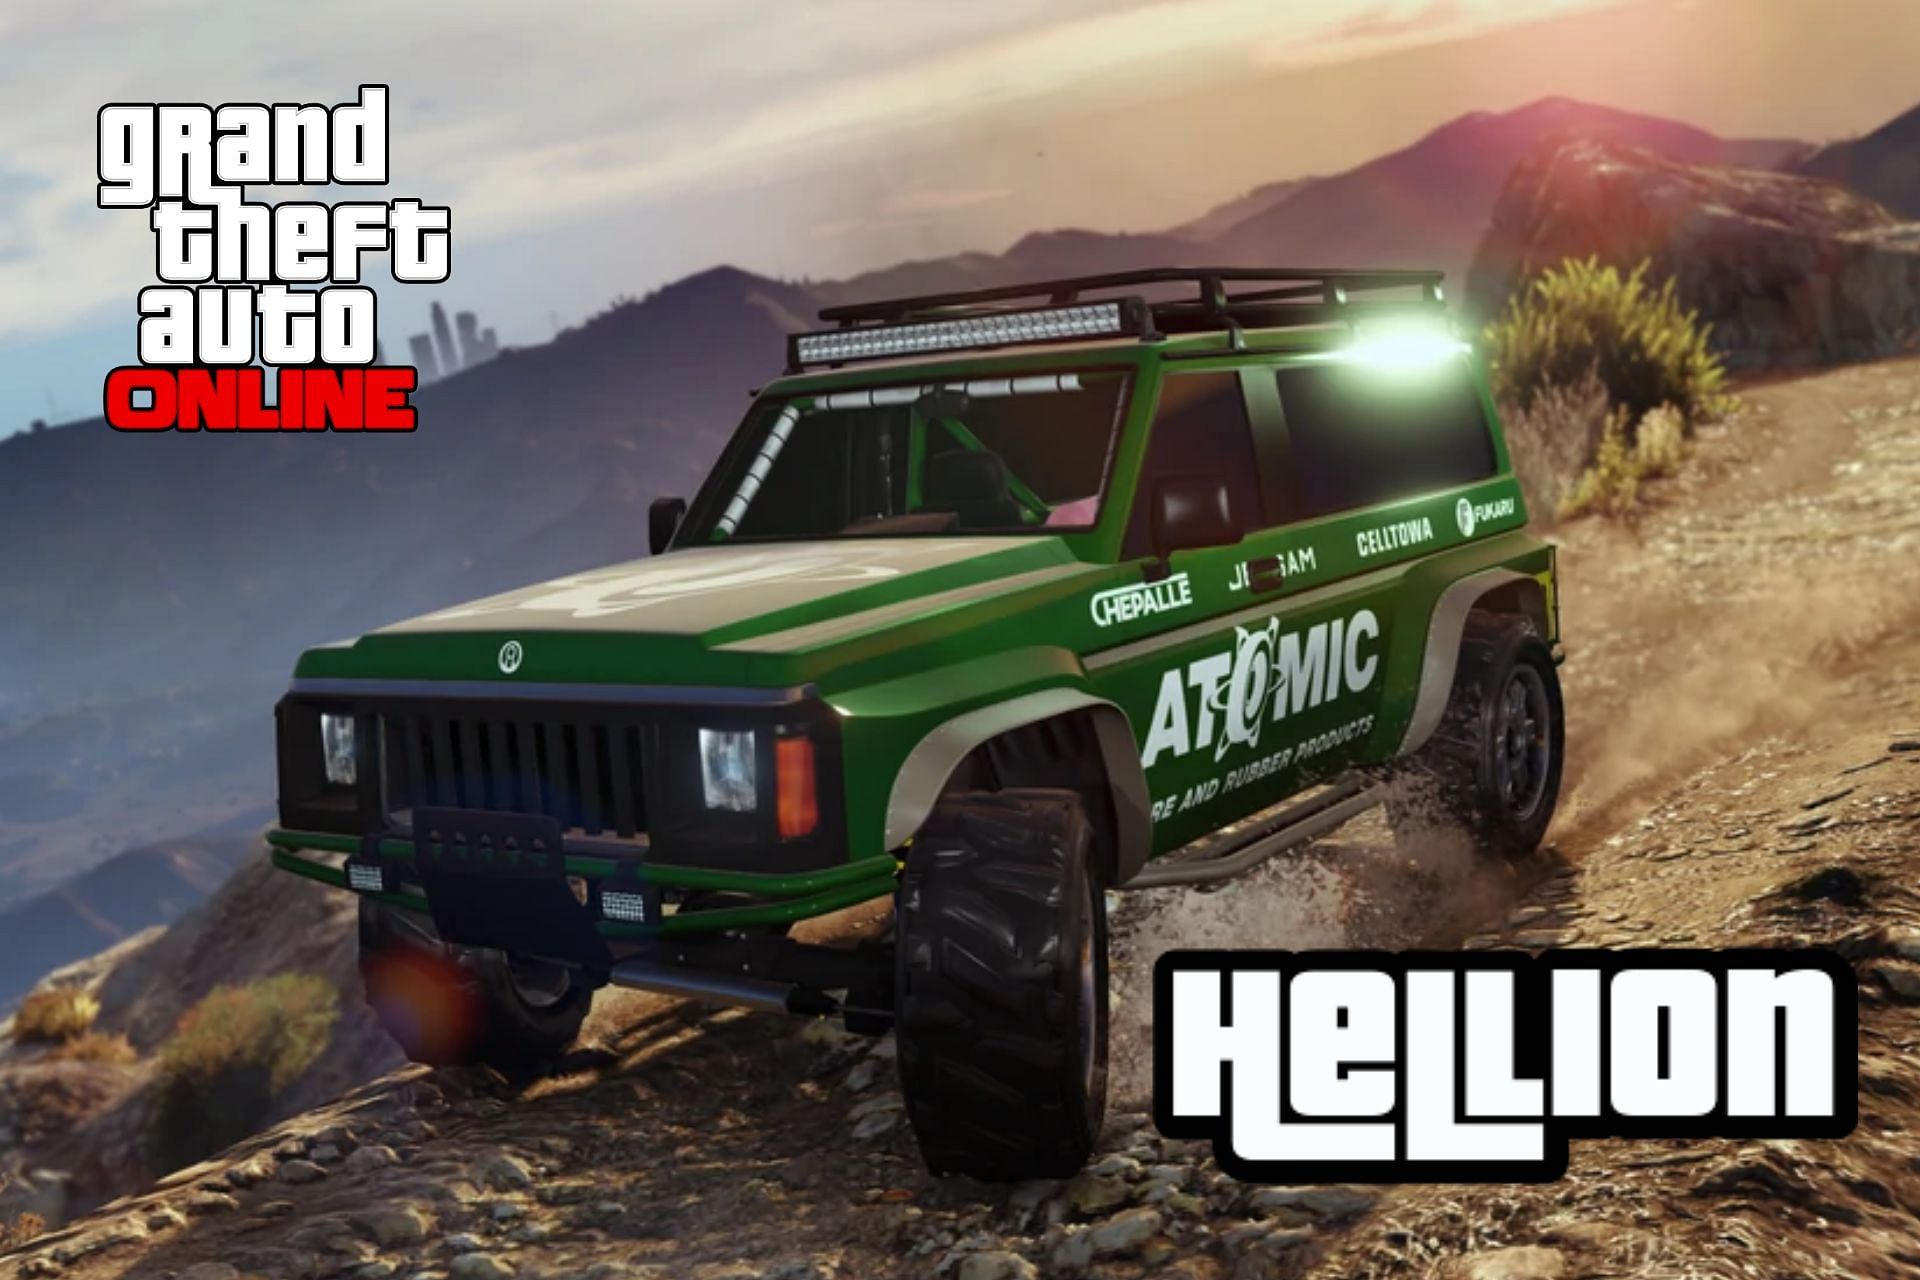 Off-road vehicle fans should check out the Hellion in GTA Online (Image via Rockstar Games)